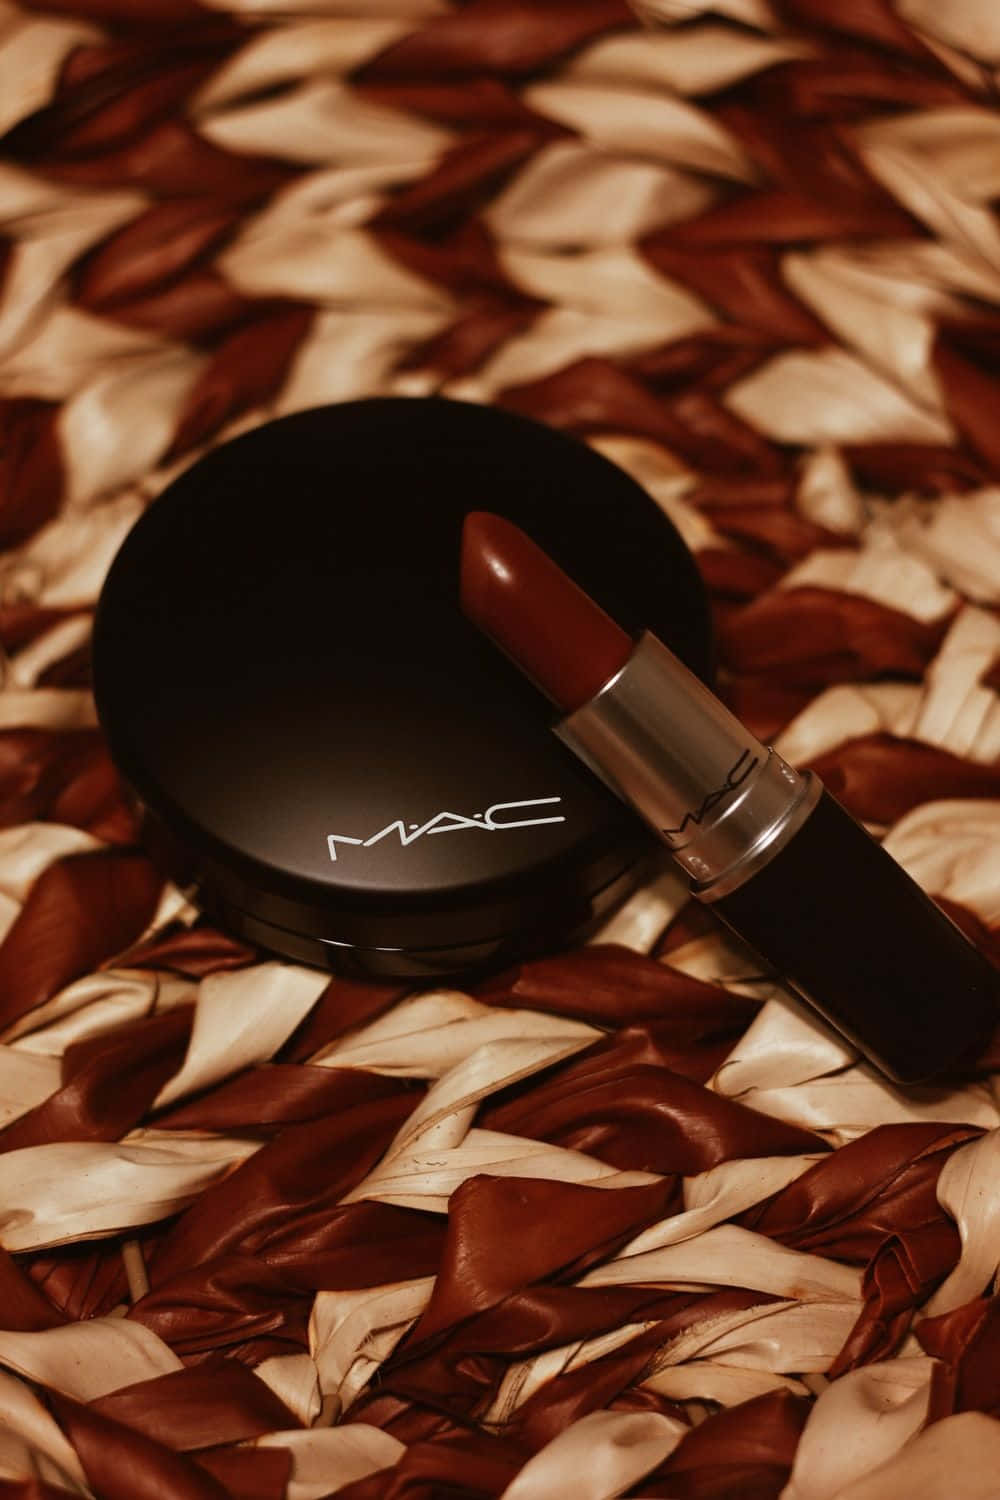 Get your hands on quality Mac Cosmetics products today.